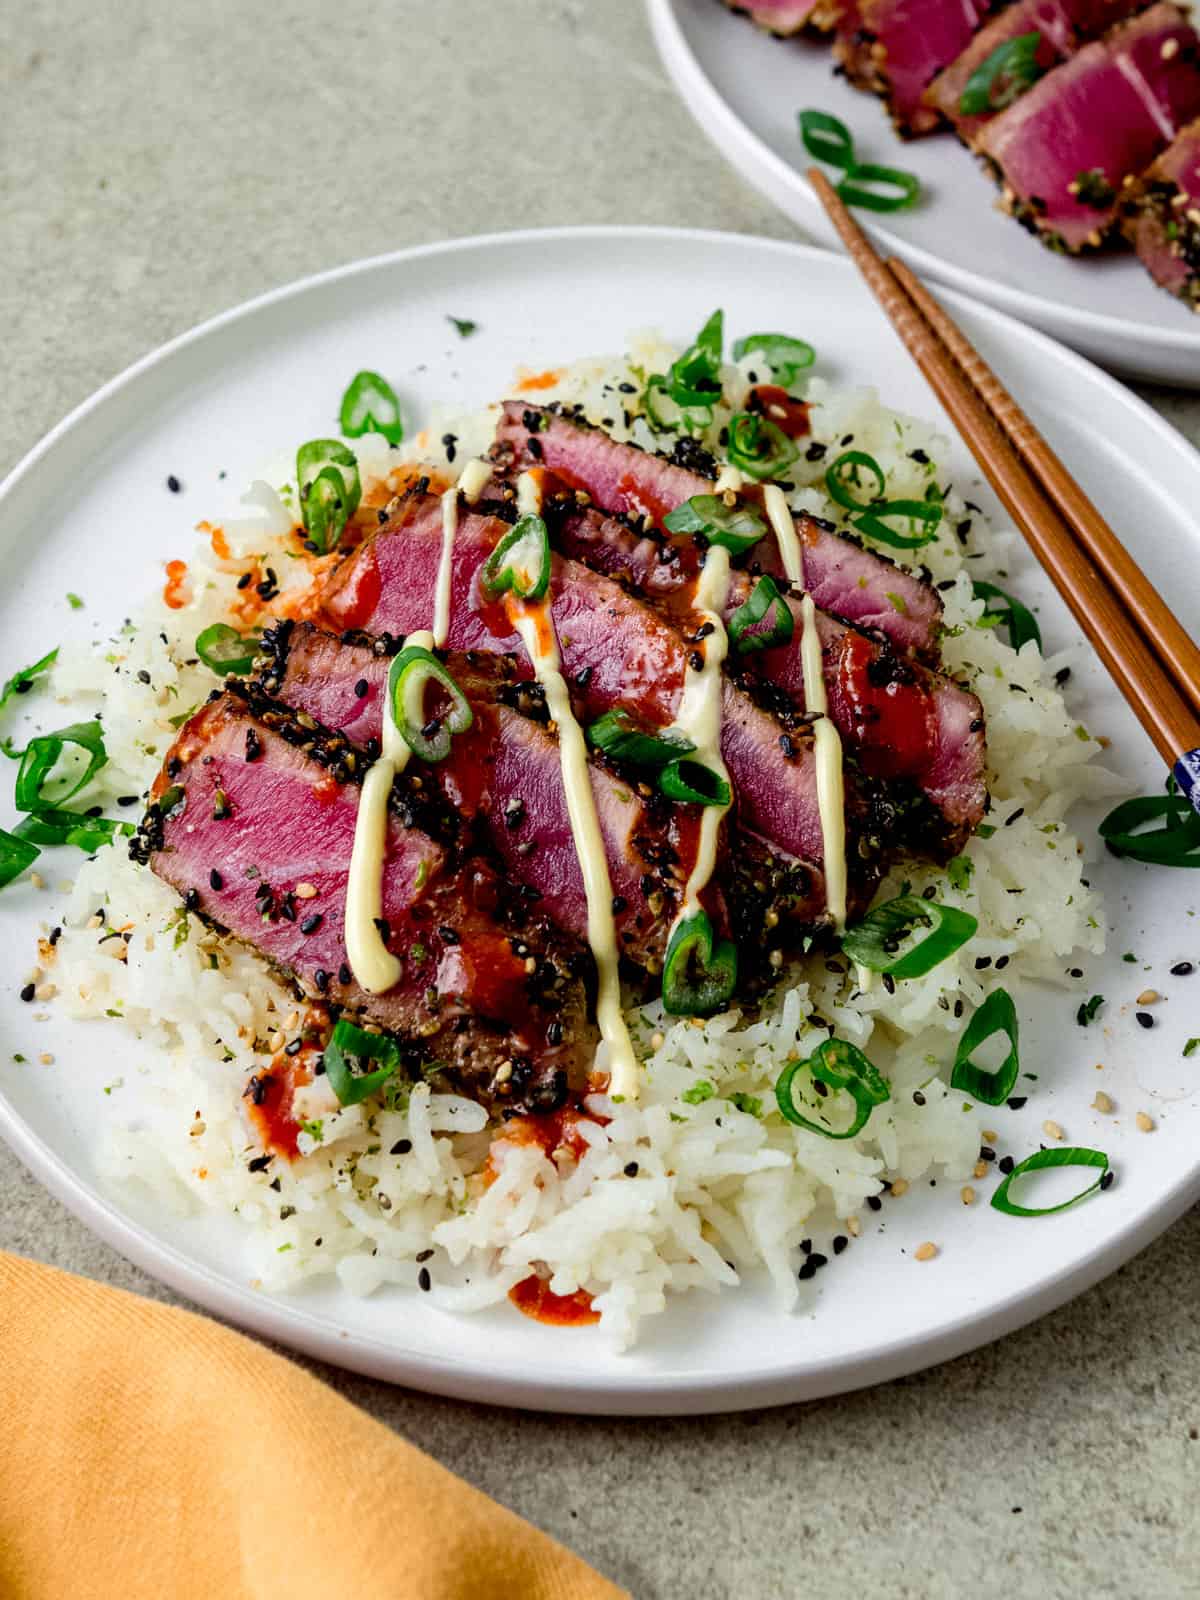 Seared ahi with furikake that is served over white rice and garnished with green onions and a drizzle of kewpie mayo and sriracha.